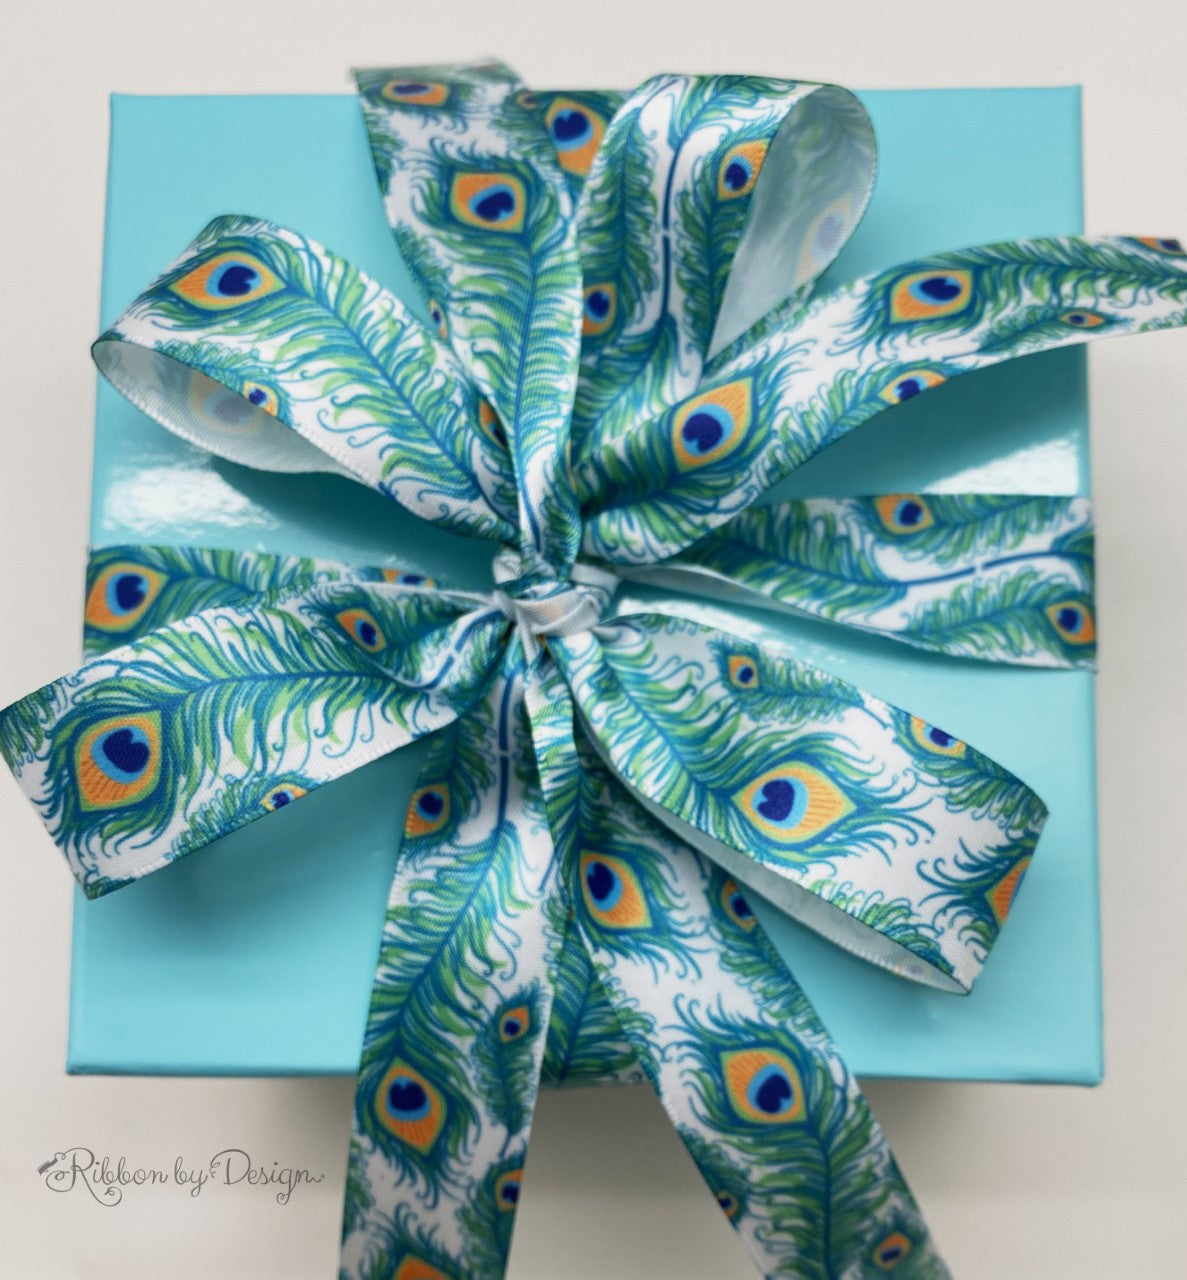 Peacock feathers ribbon in turquoise, green and yellow on 7/8" white single face satin